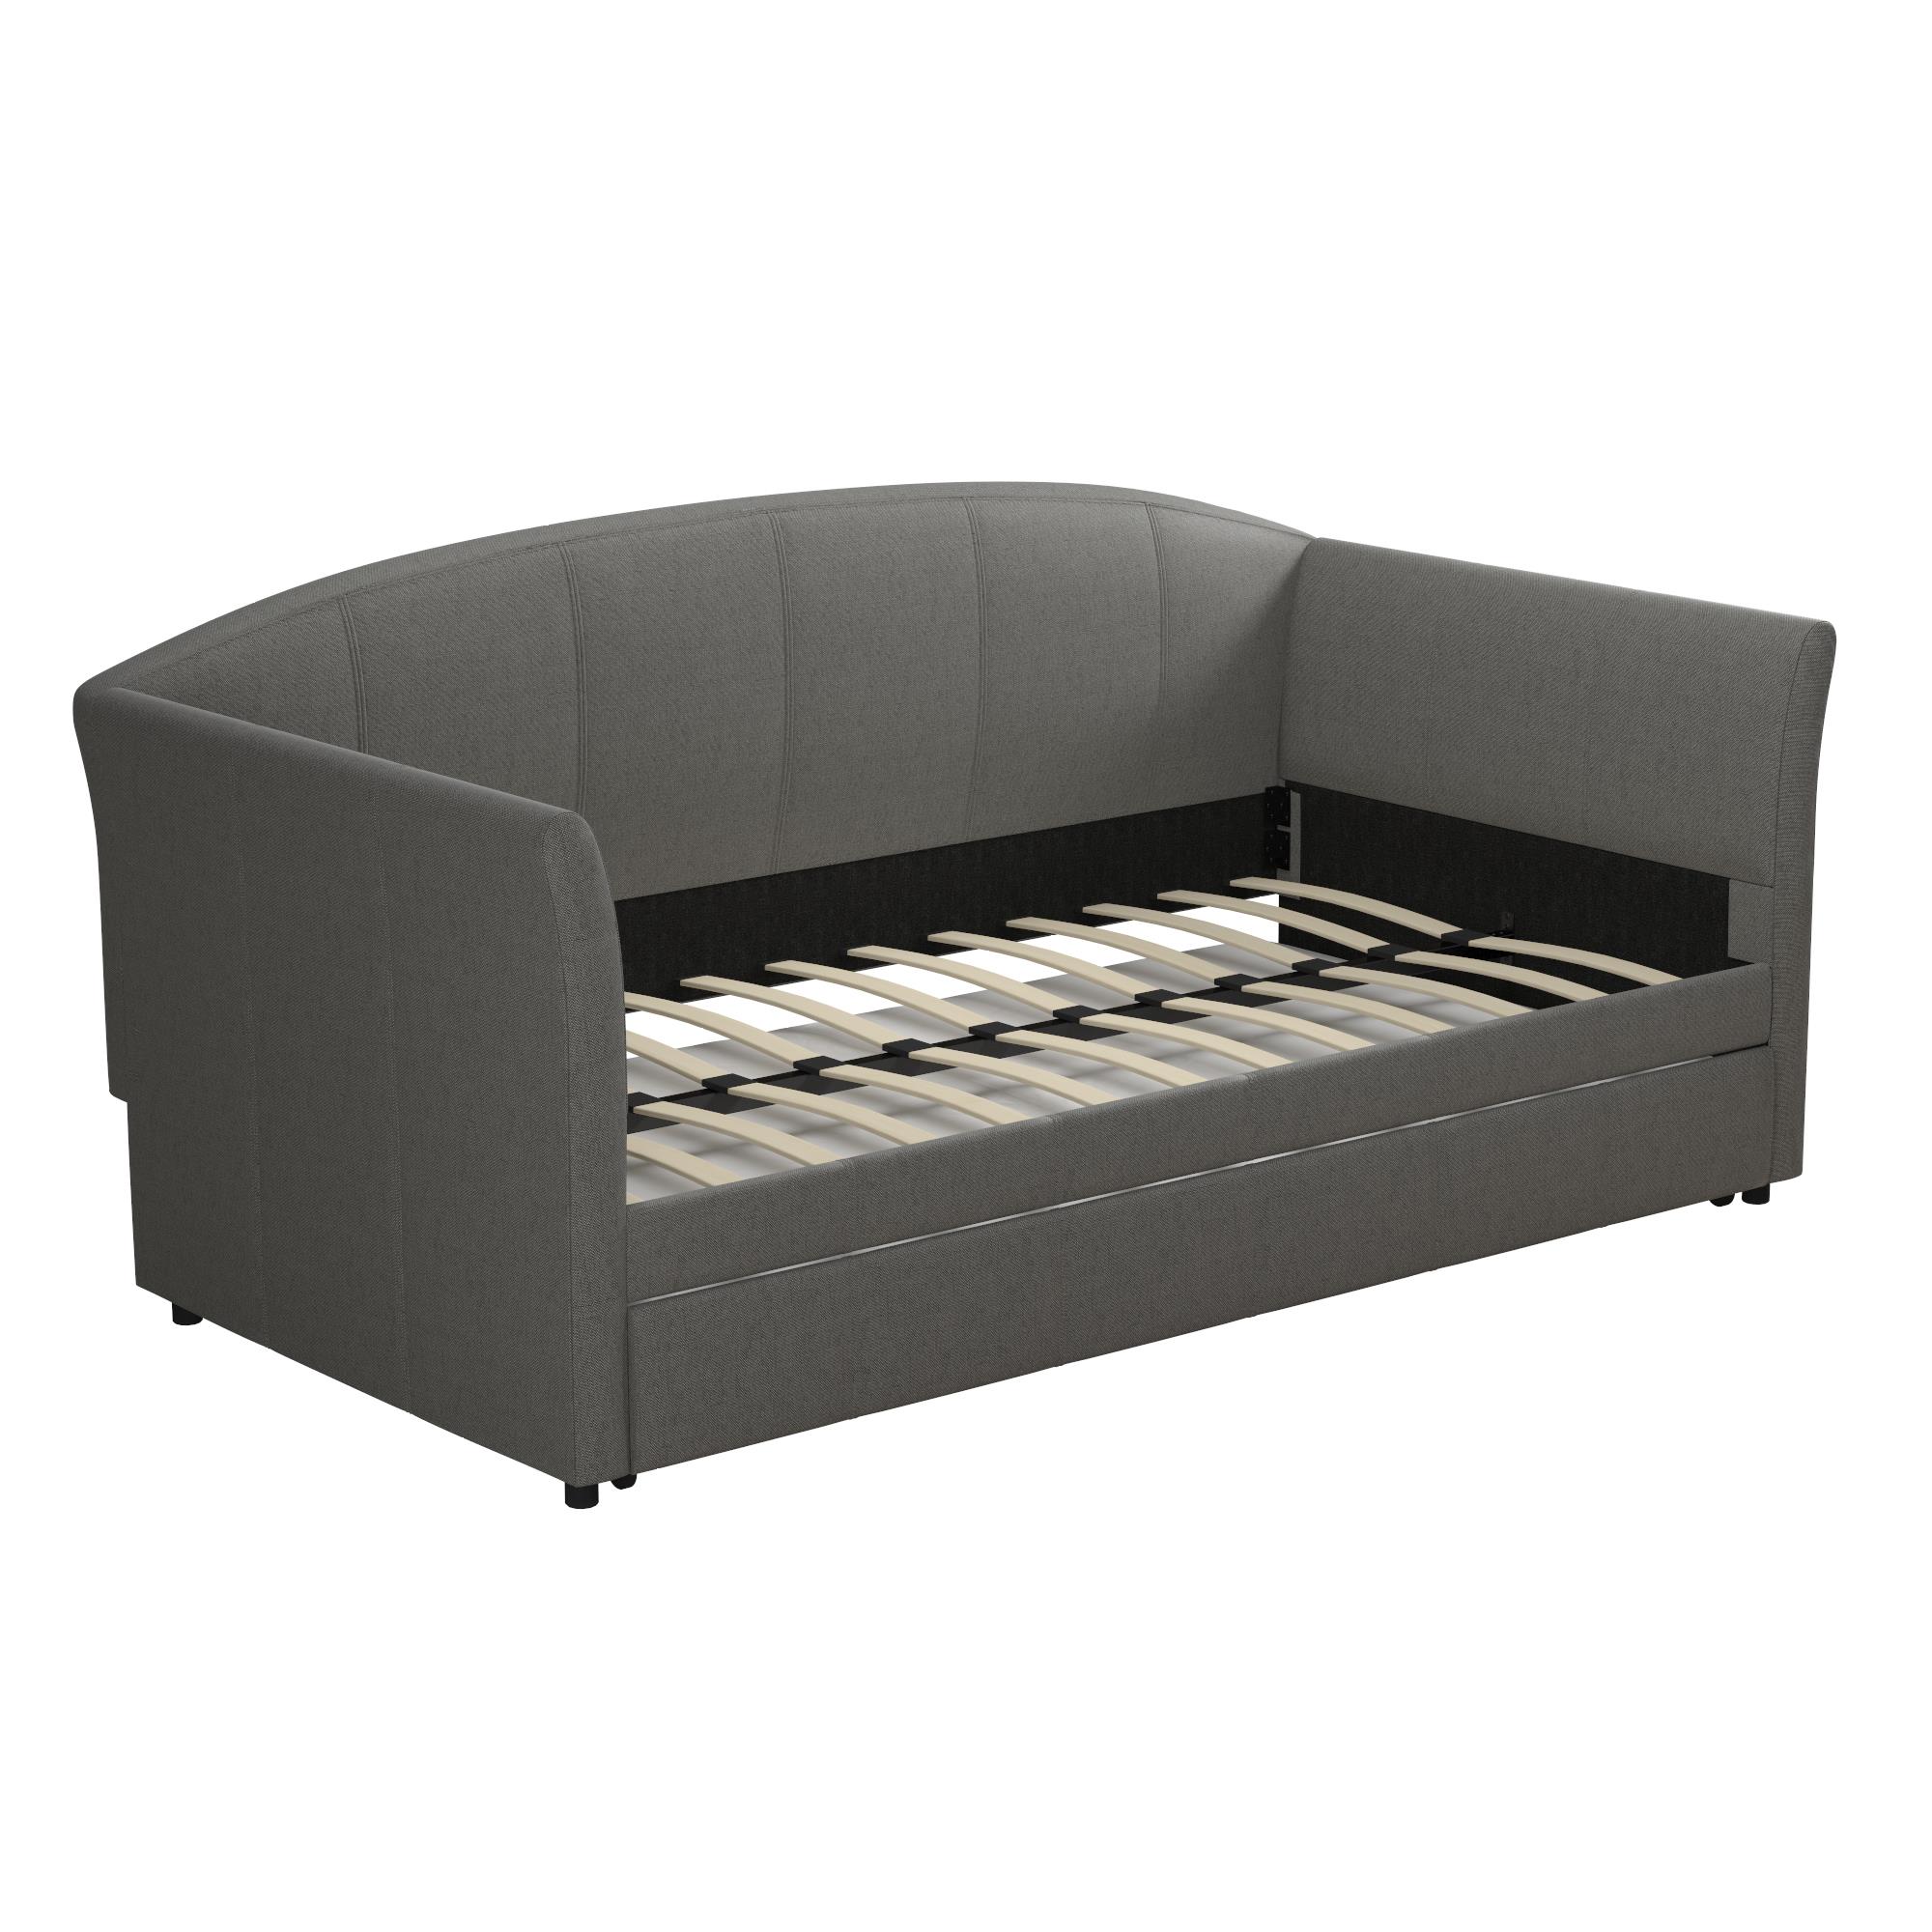 DHP Halle Upholstered Daybed and Trundle, Grey Linen, Twin - Walmart.com